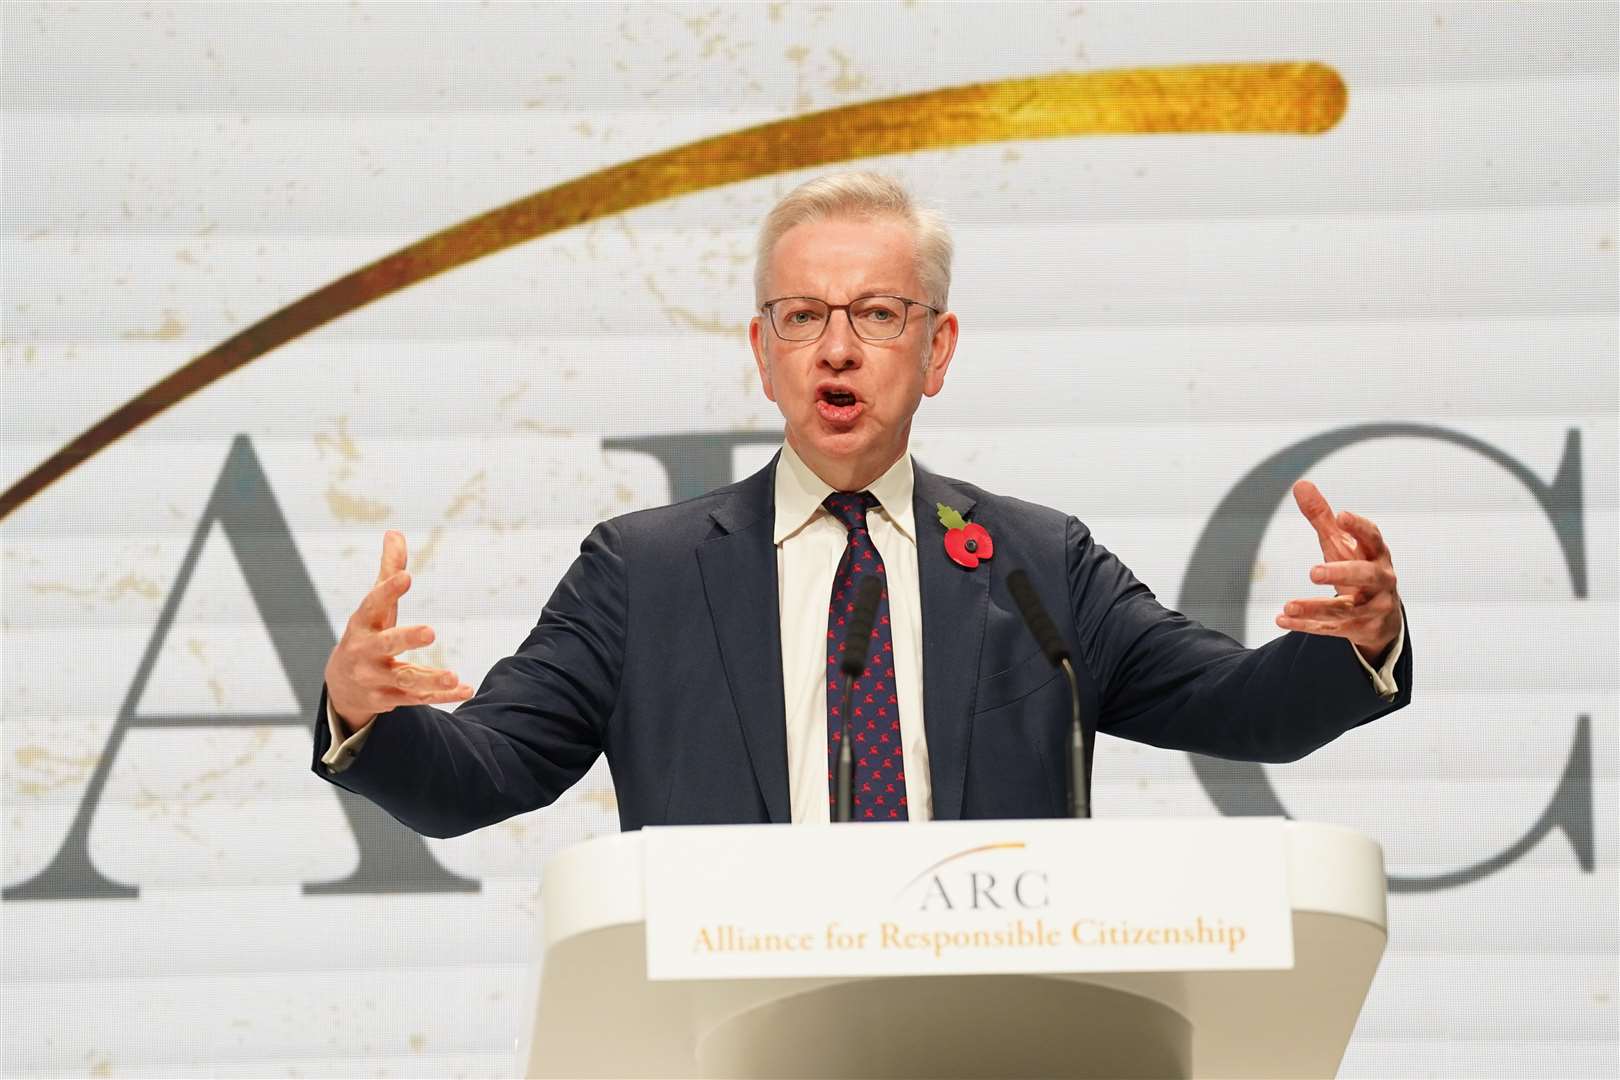 Michael Gove made his comments at a conference organised by the Alliance for Responsible Citizenship (Stefan Rousseau/PA)